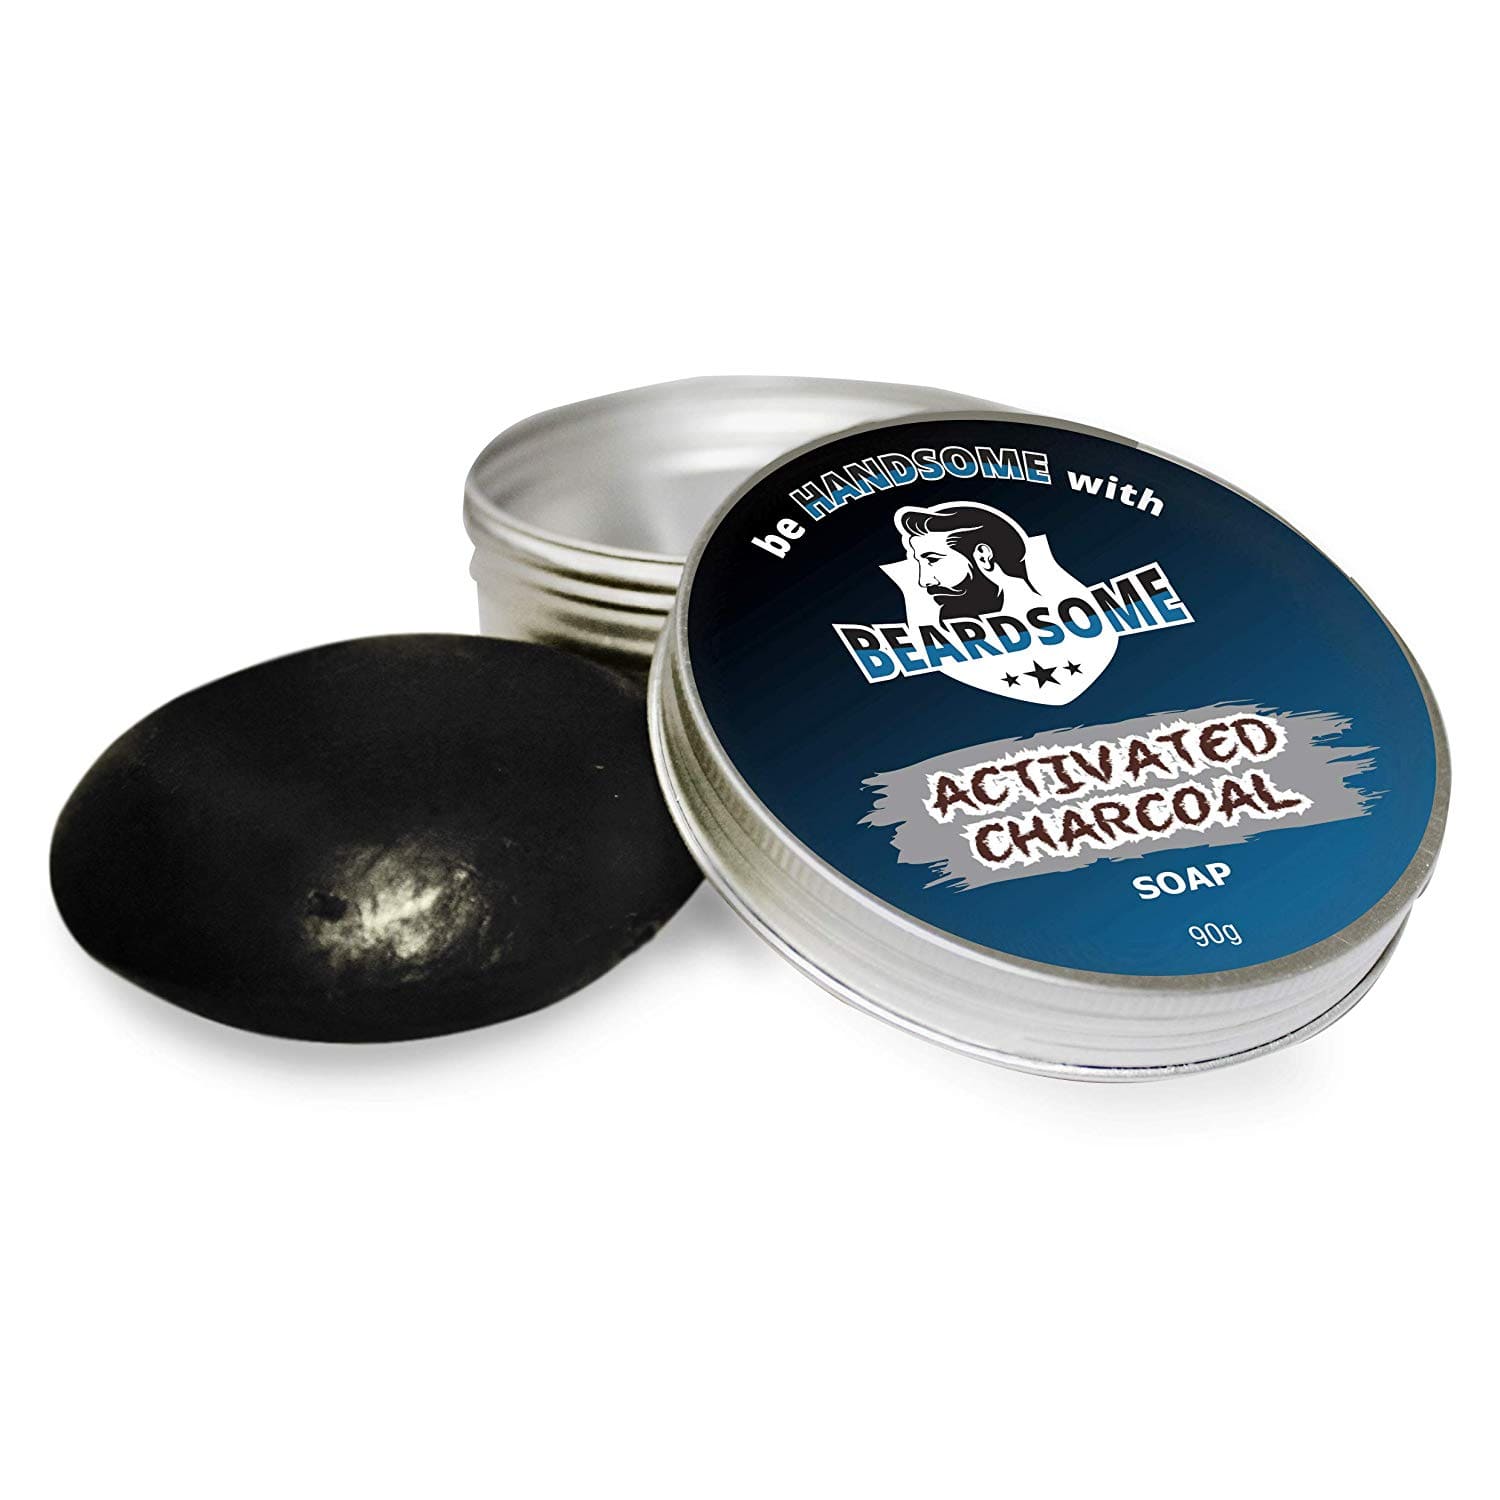 shoprythmindia Men's Grooming Beardsome Activated Charcoal Soap for Men